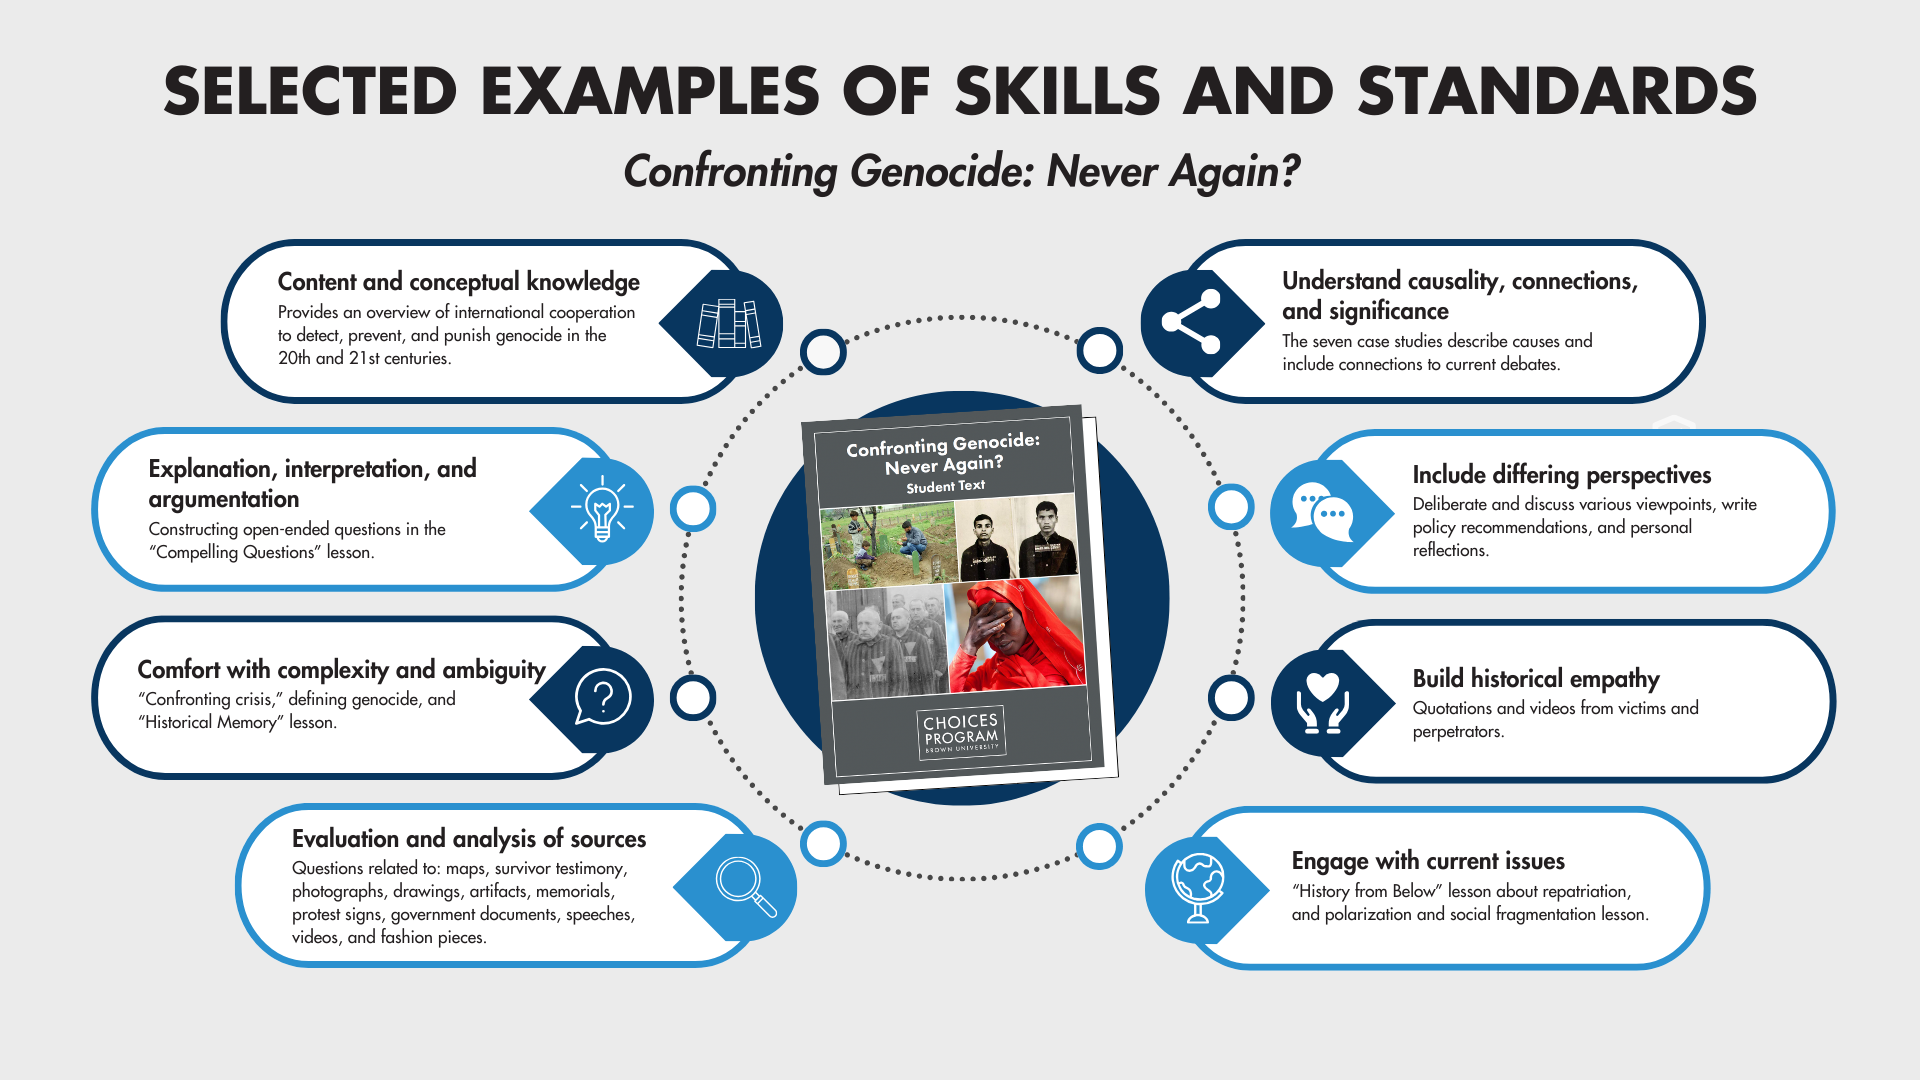 Infographic that highlights some of the skills and standards in the Choices "Confronting Genocide: Never Again?" curriculum unit. Skills include content and conceptual knowledge, comfort with complexity and ambiguity, evaluation and analysis of sources, historical empathy, current issues, and more.